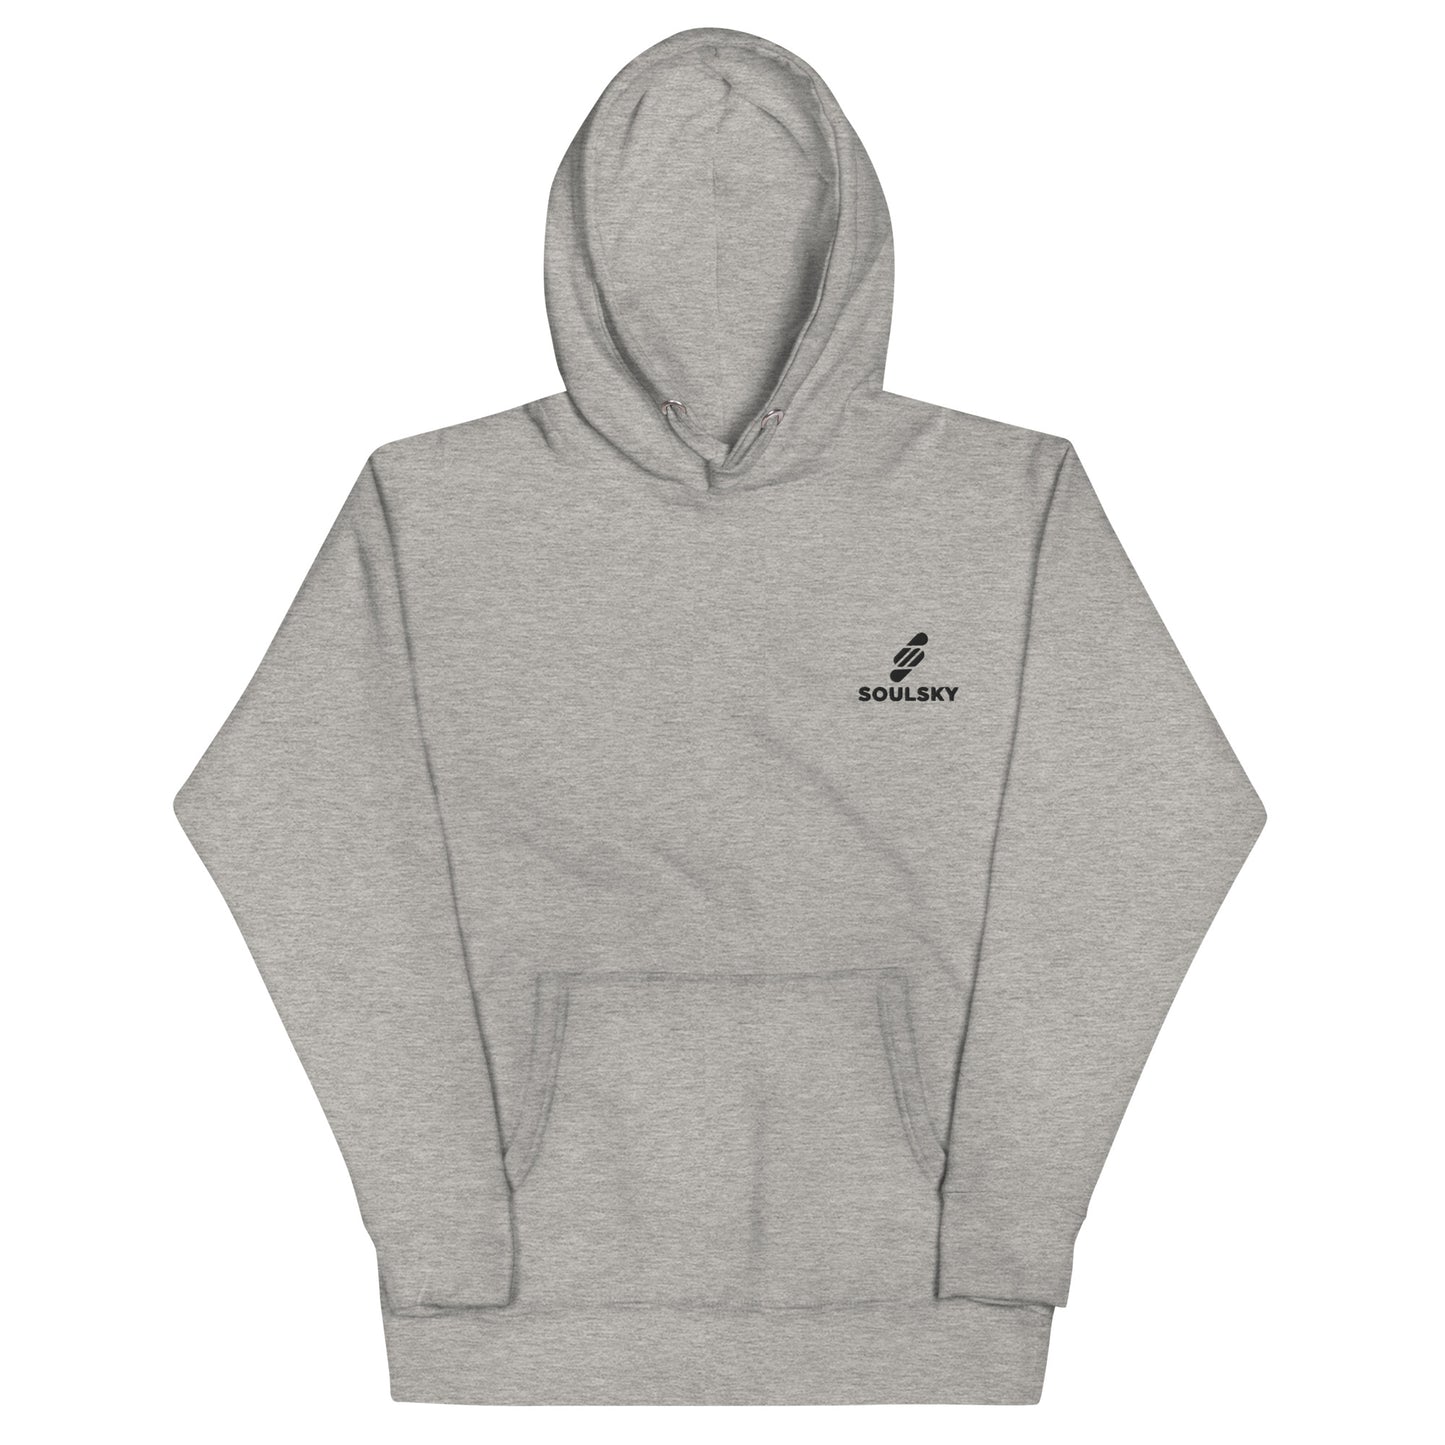 Light gray hoodie with black embroidered logo on the upper left side that says 'SOULSKY'. Hood up.